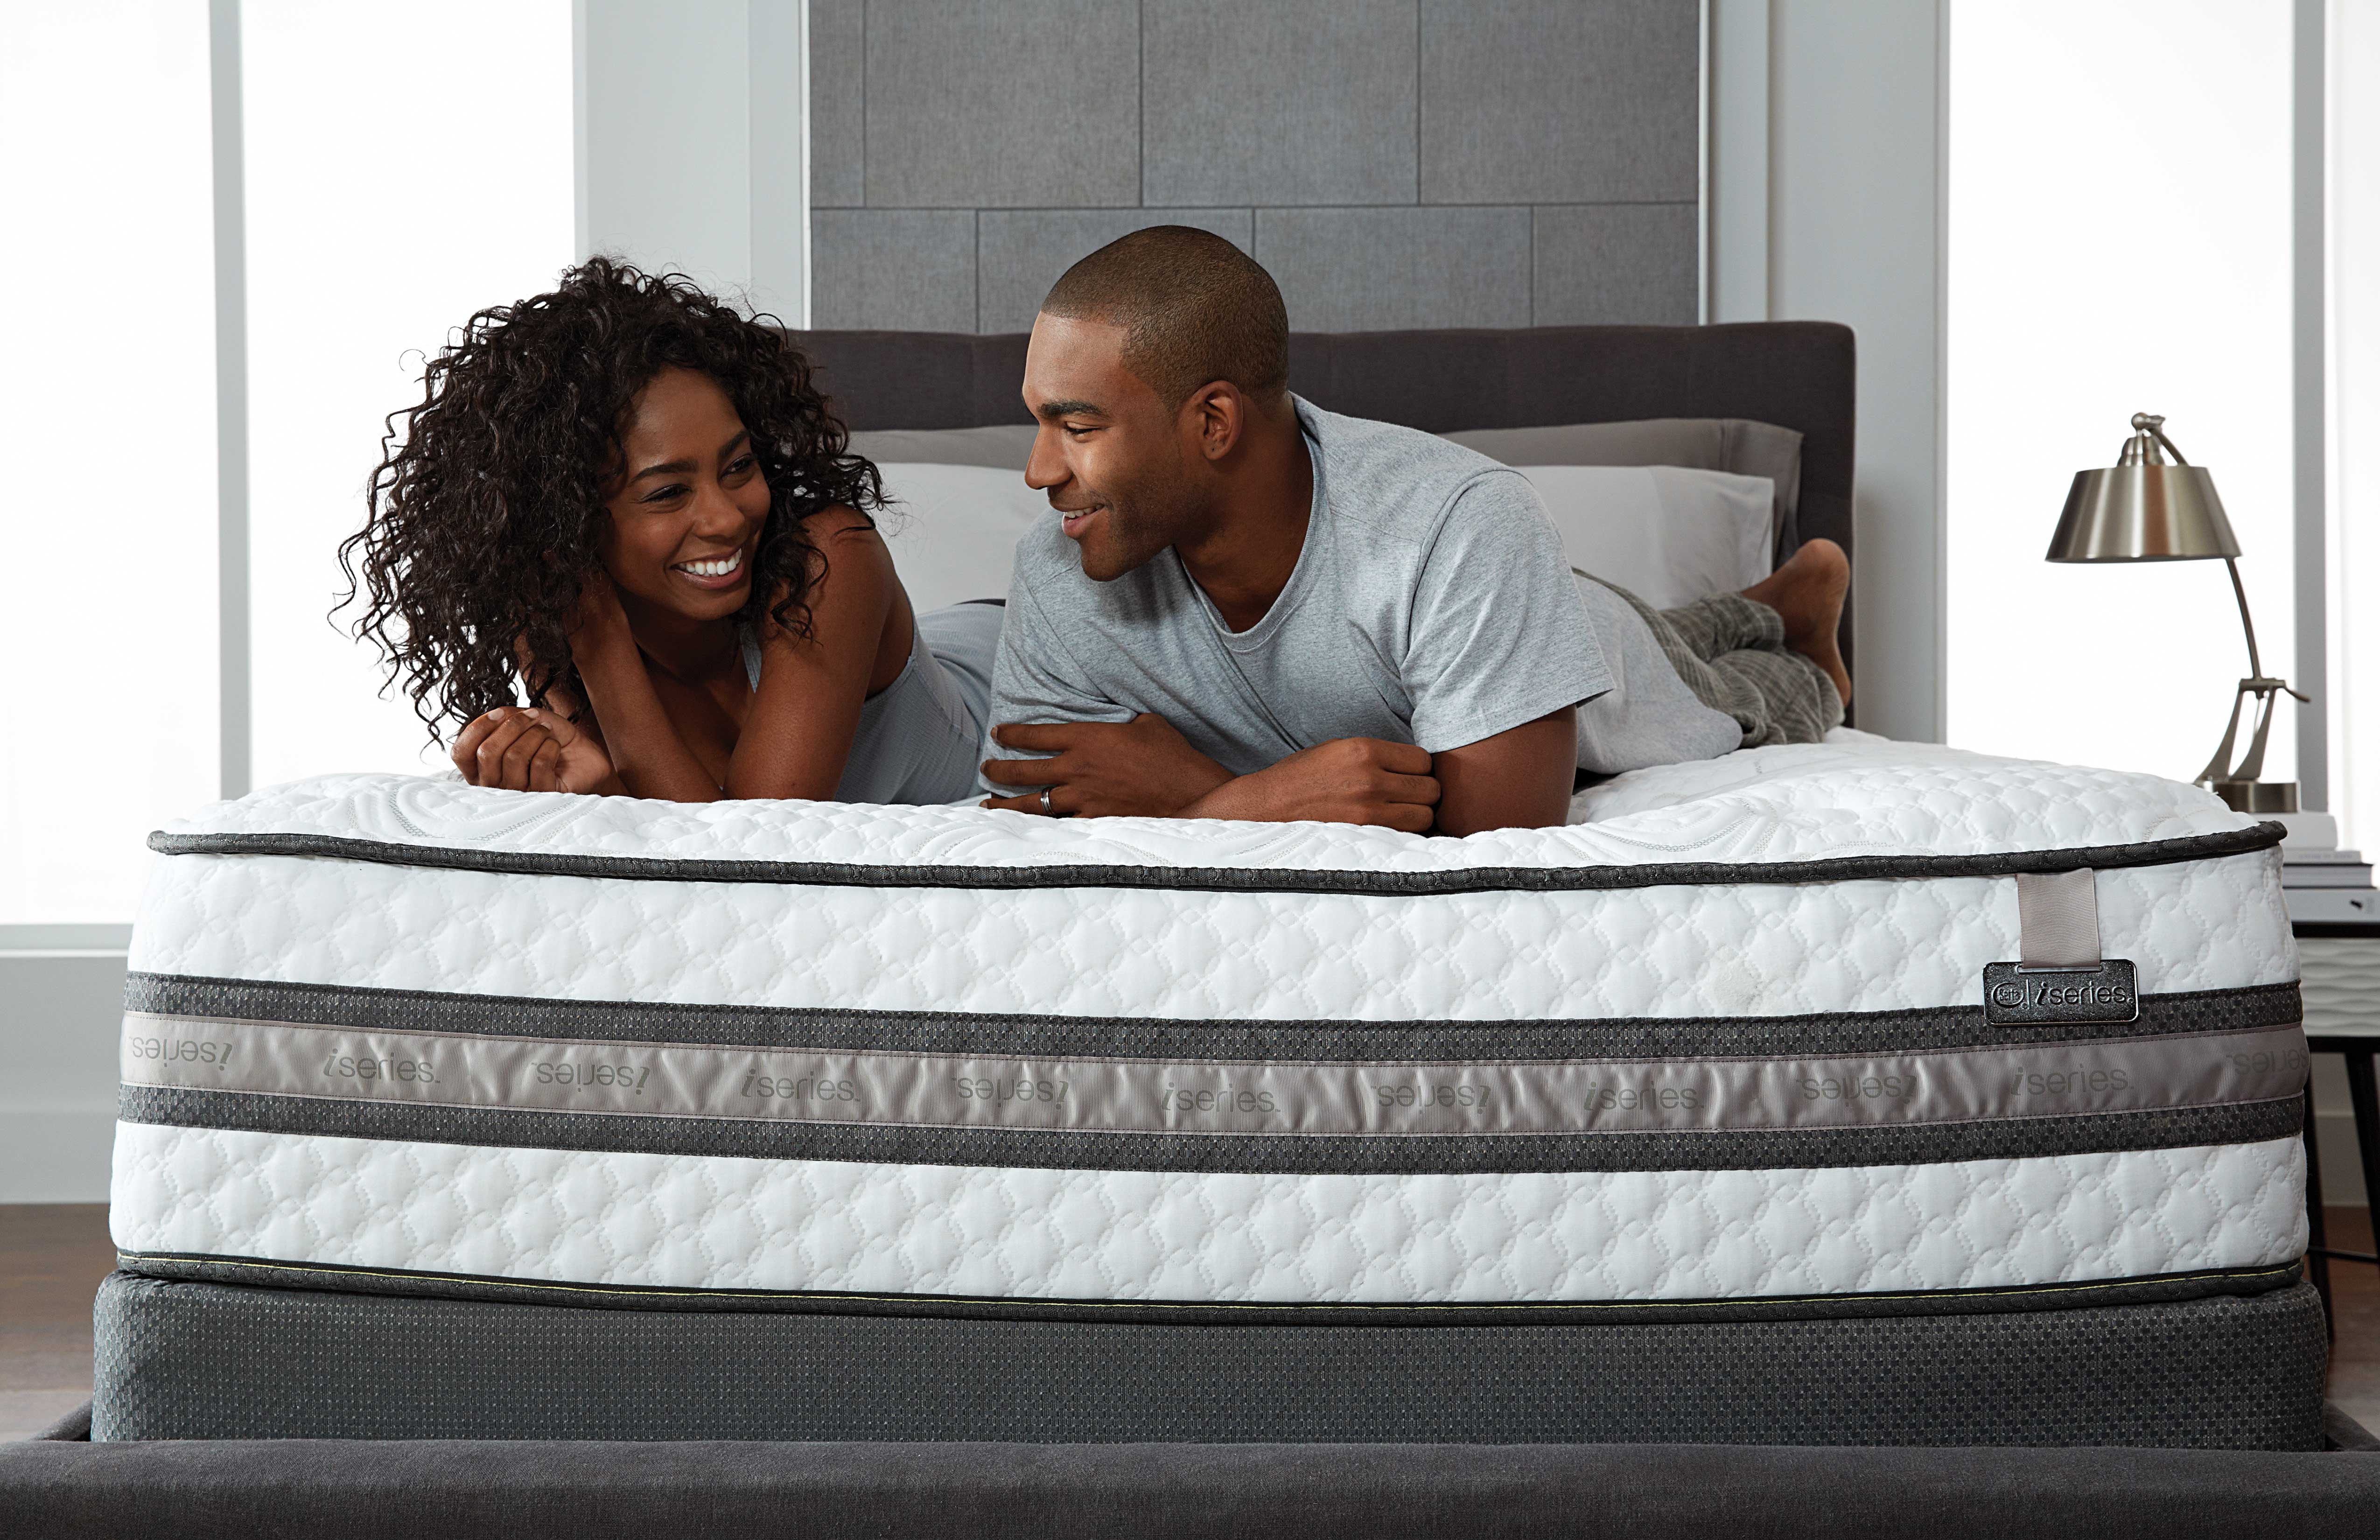 The Mattress Factory to Carry New Serta 2014 Line this Month